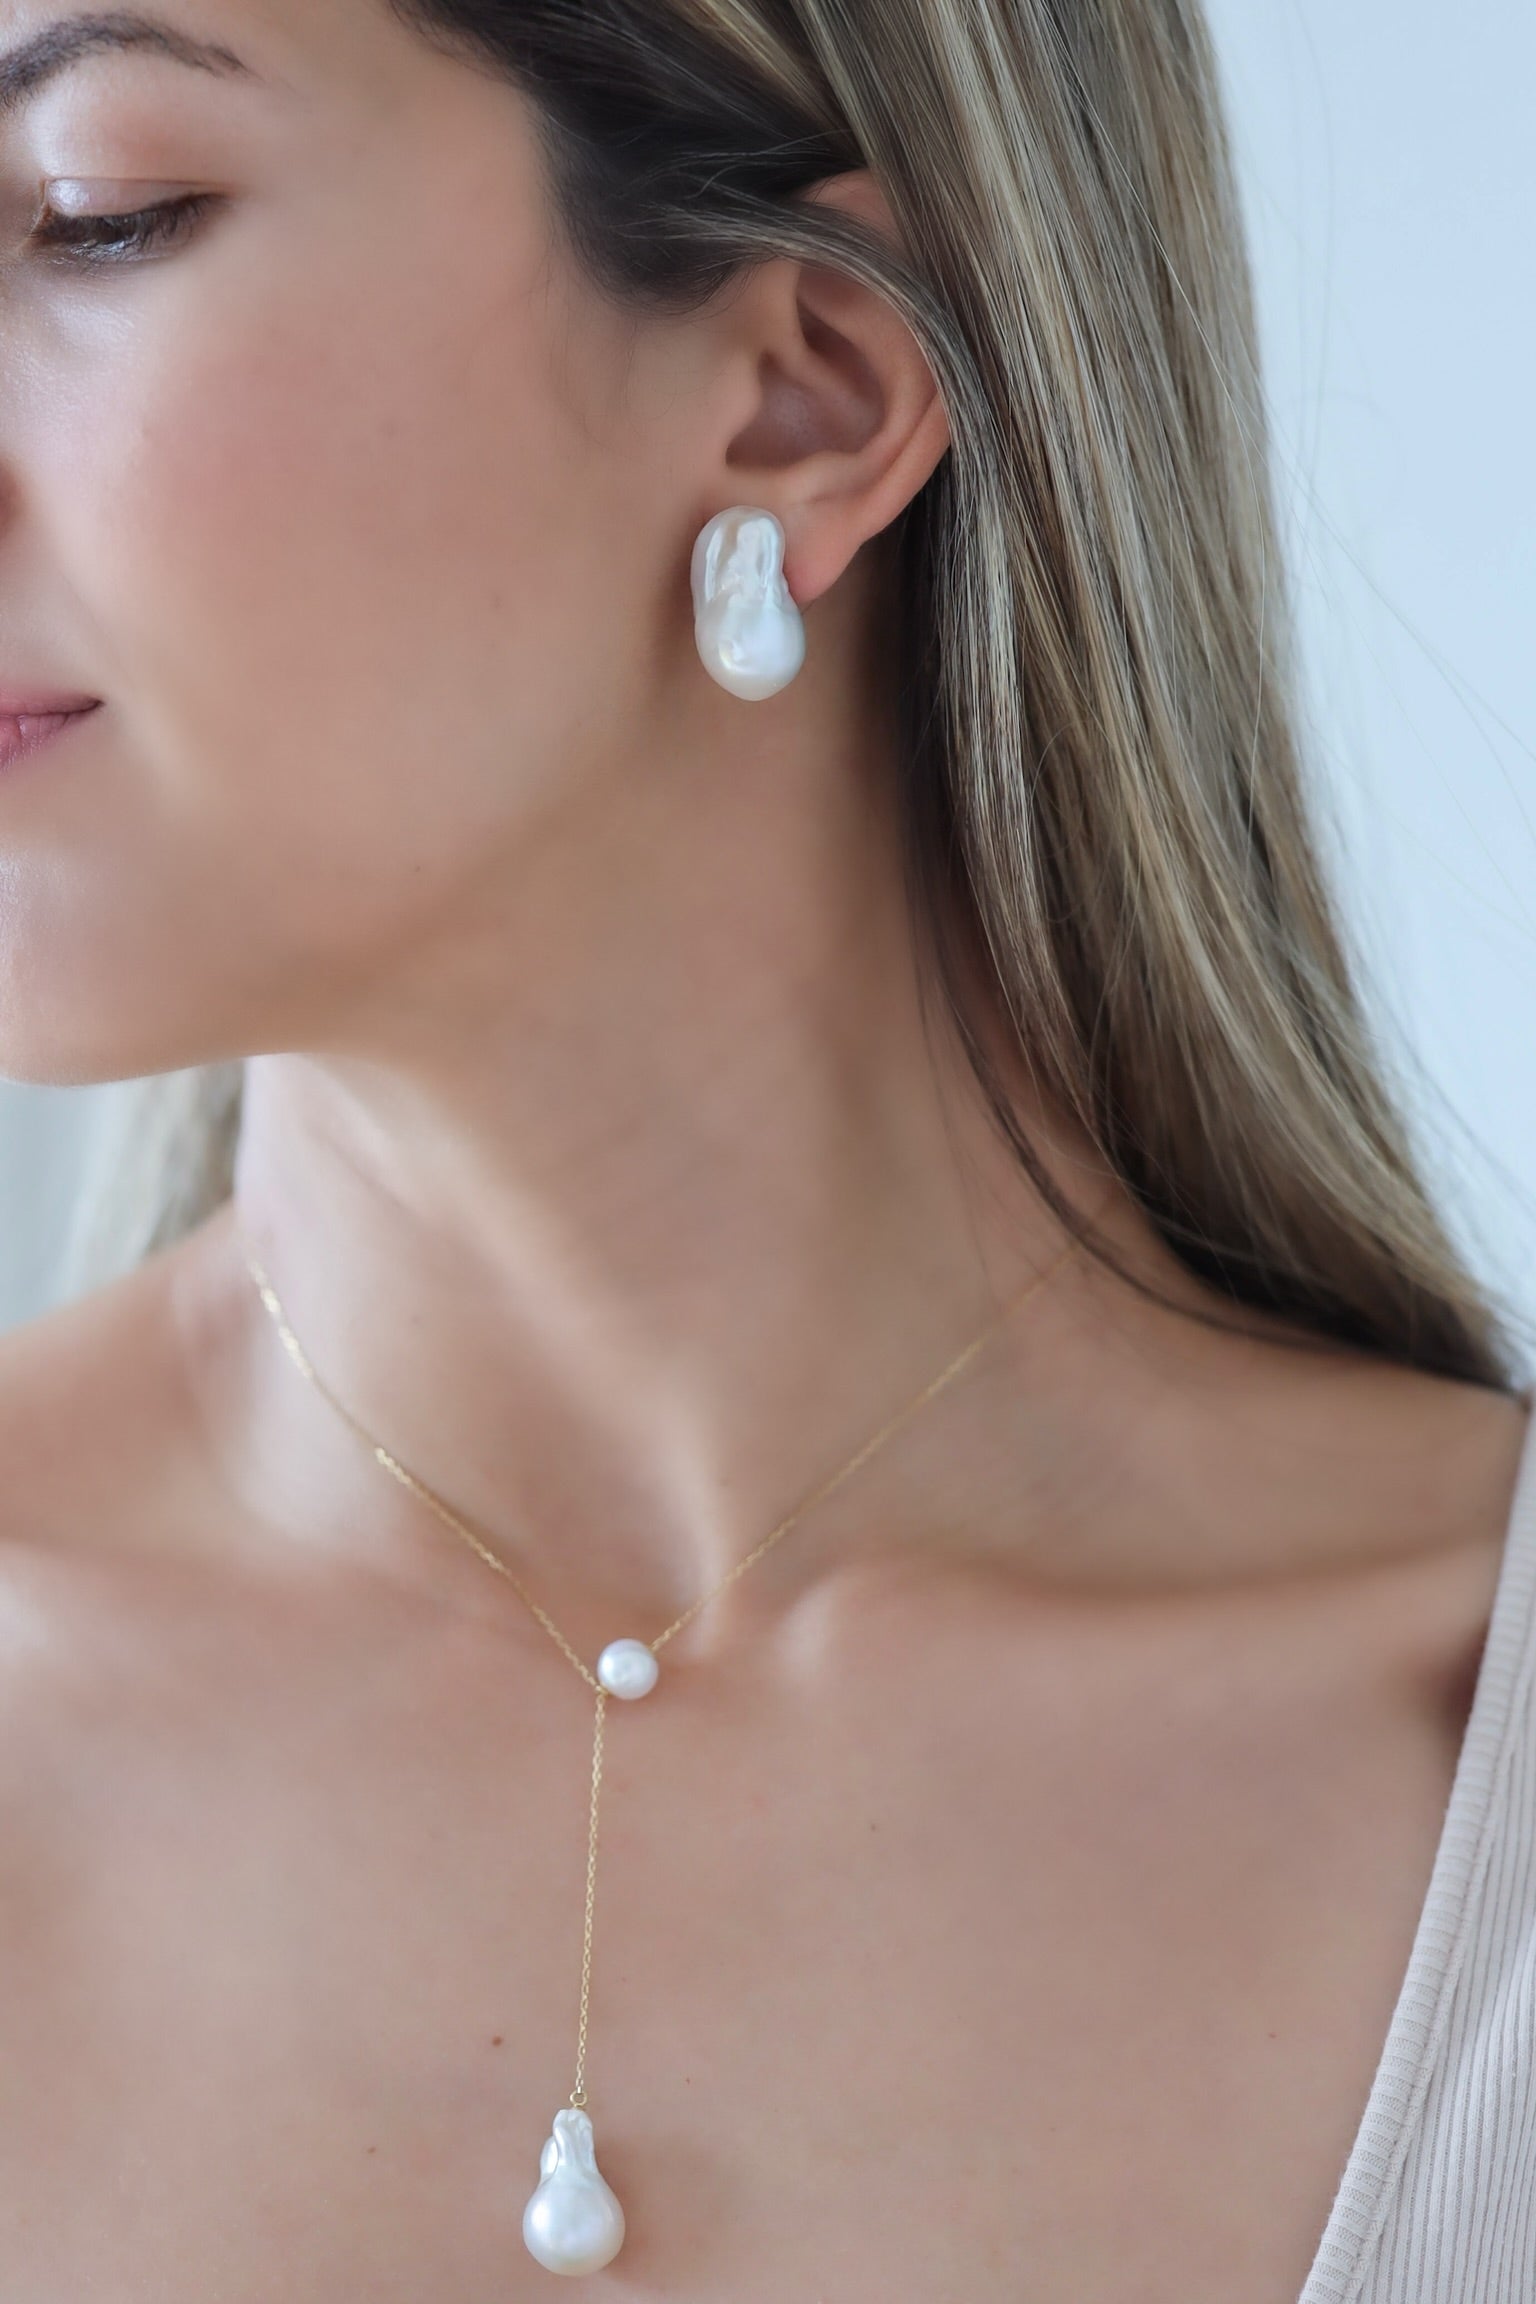 Woman wearing Baroque Pearl Stud Earrings with Baroque Pearl Long Necklace